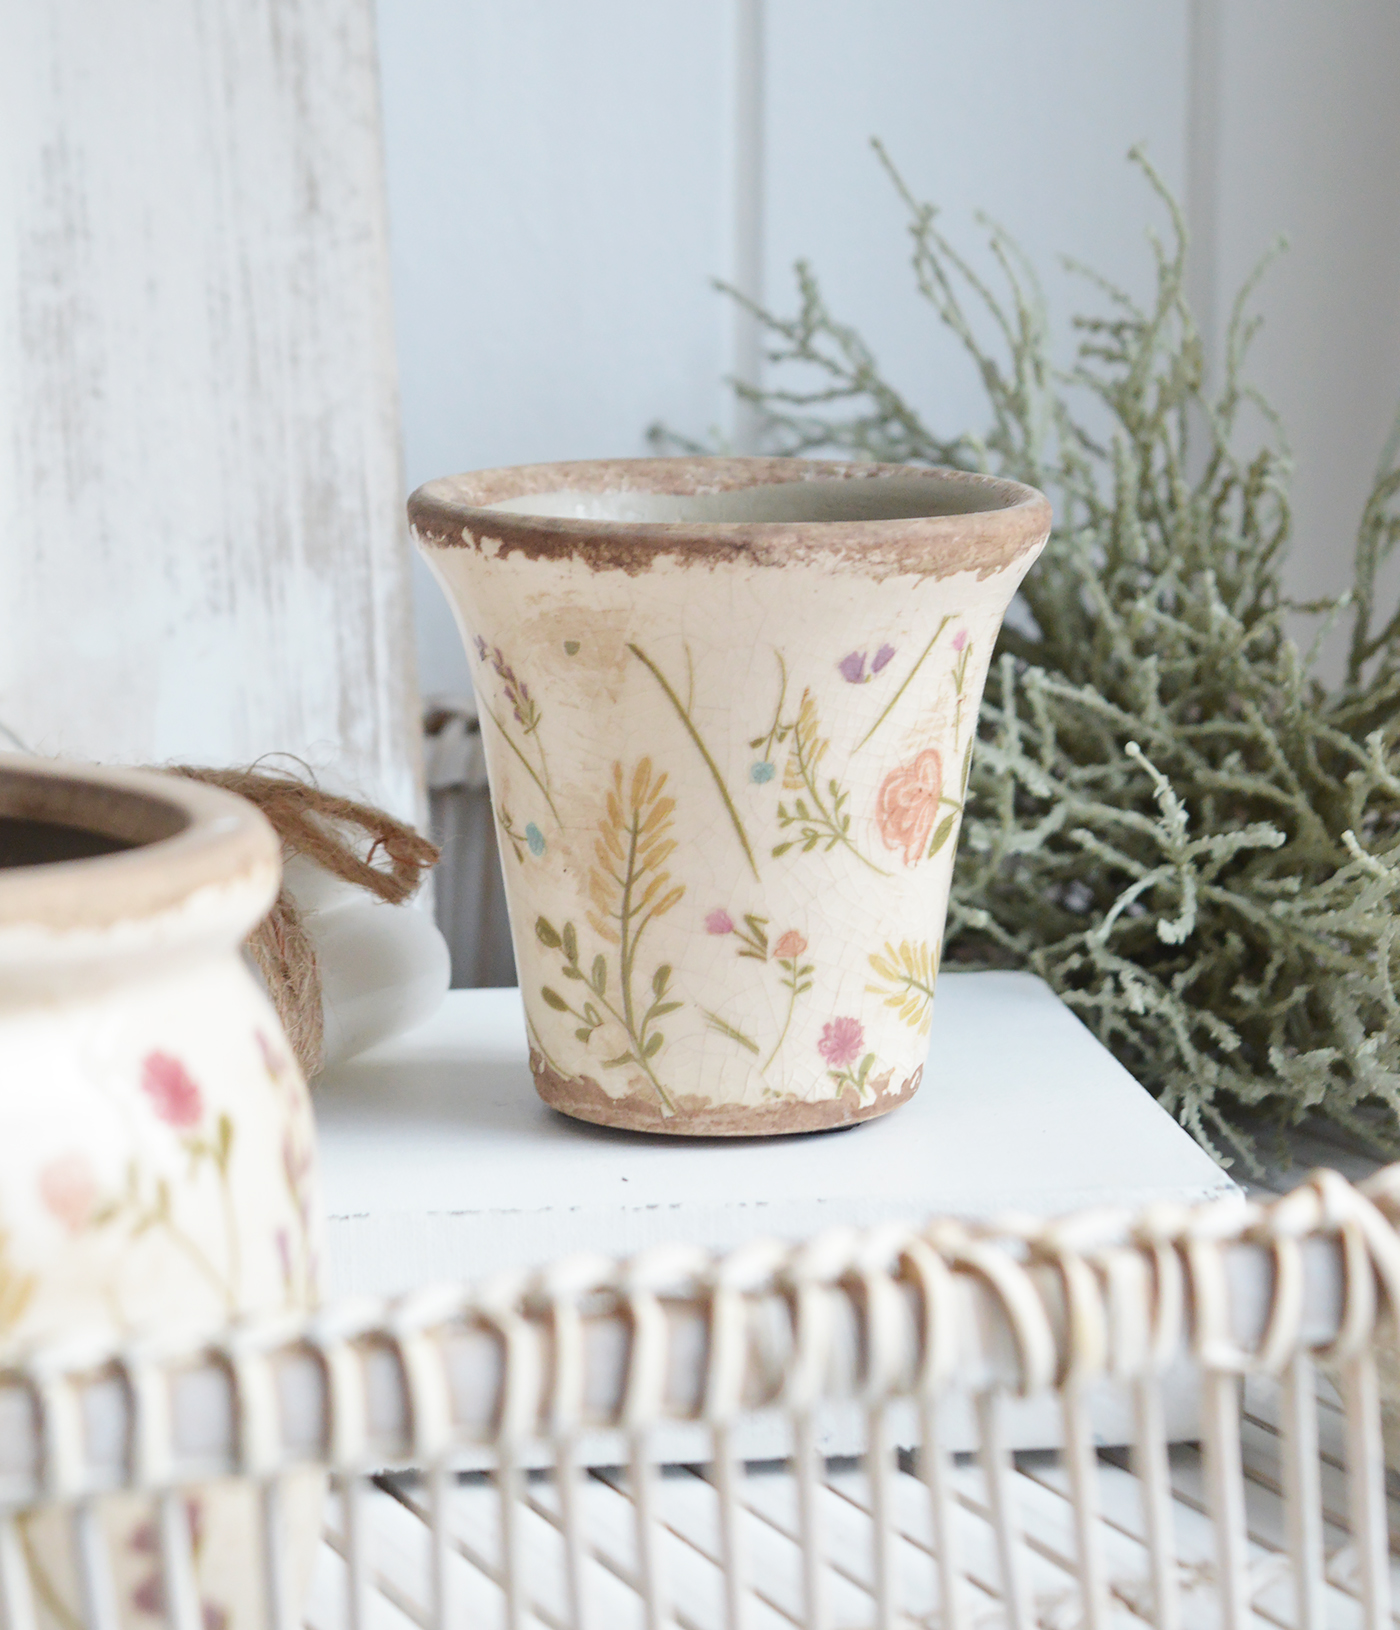 Marston Aged Vintage Style Ceramics small pot . - New England, coastal, modern farmhouse and country homes interiors and furniture